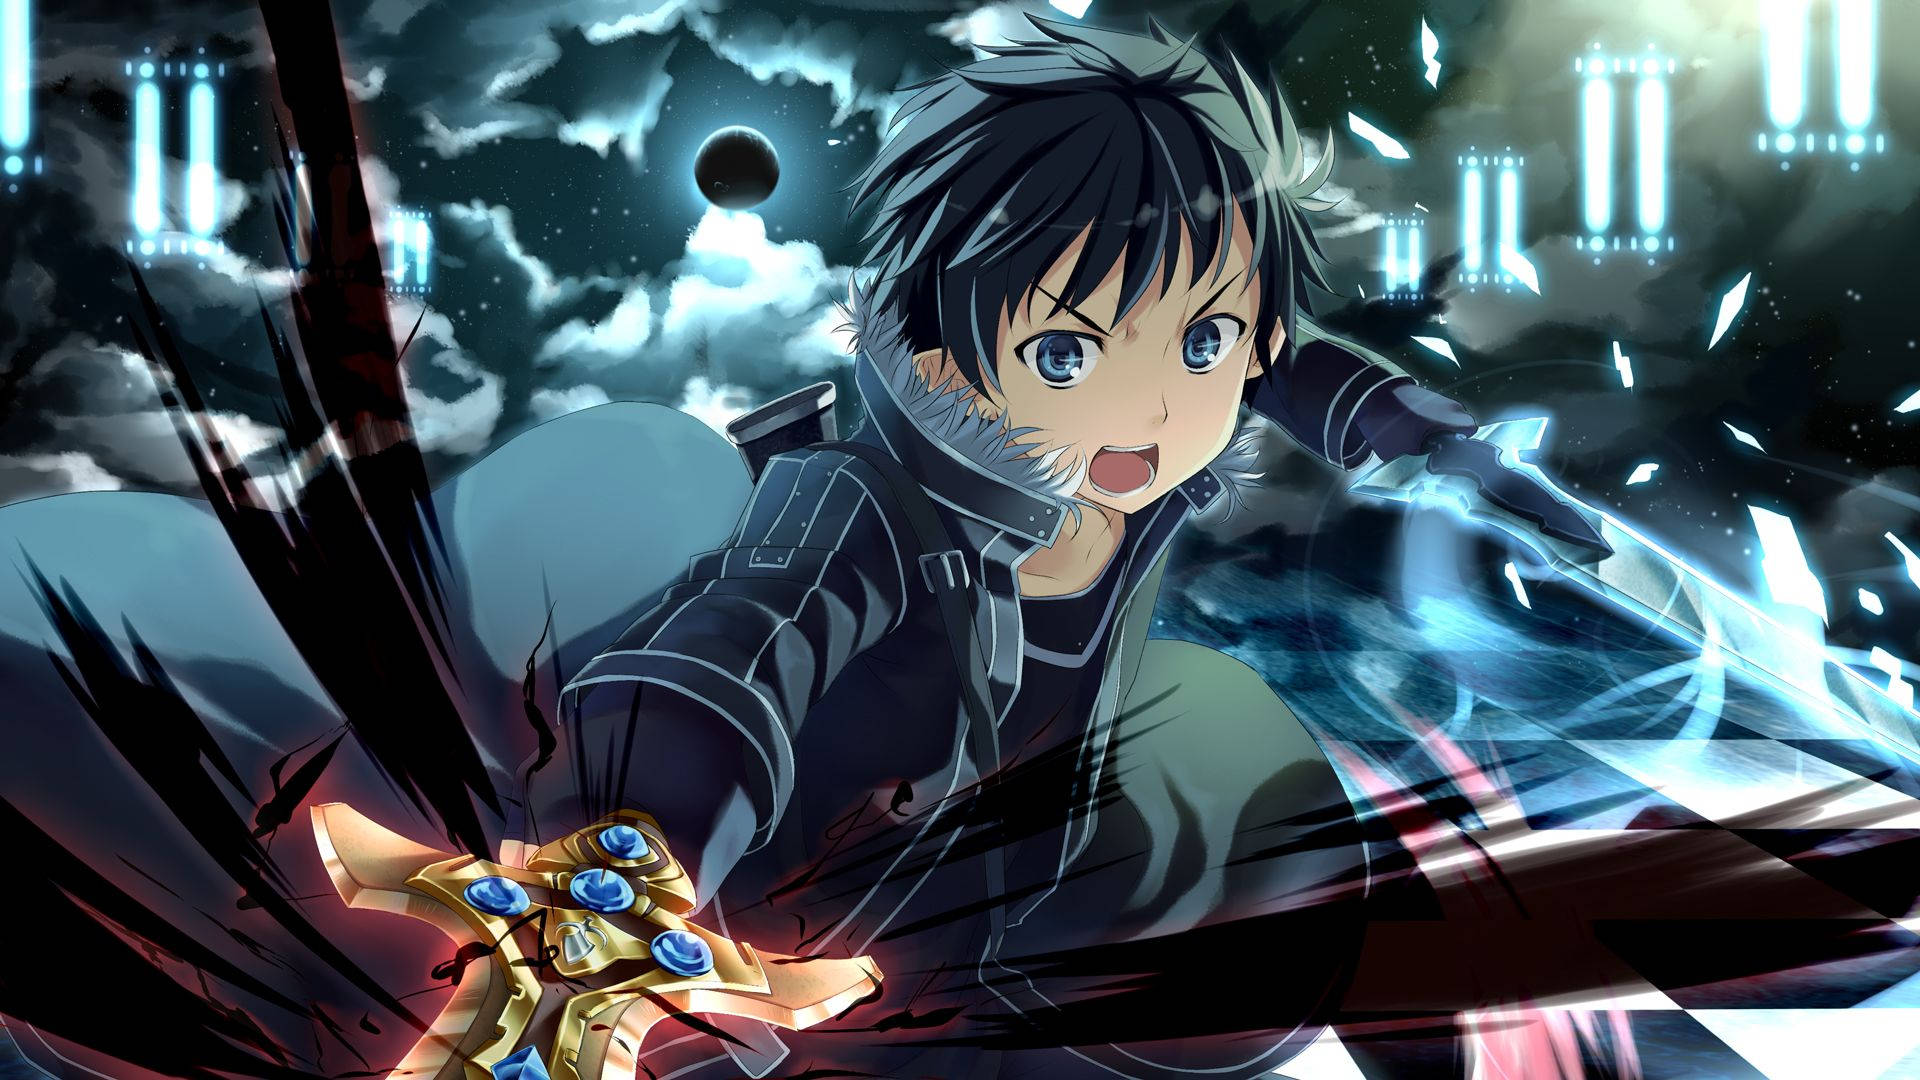 Kirito is locked and loaded, getting ready to take on the challenges of Sword Art Online Wallpaper